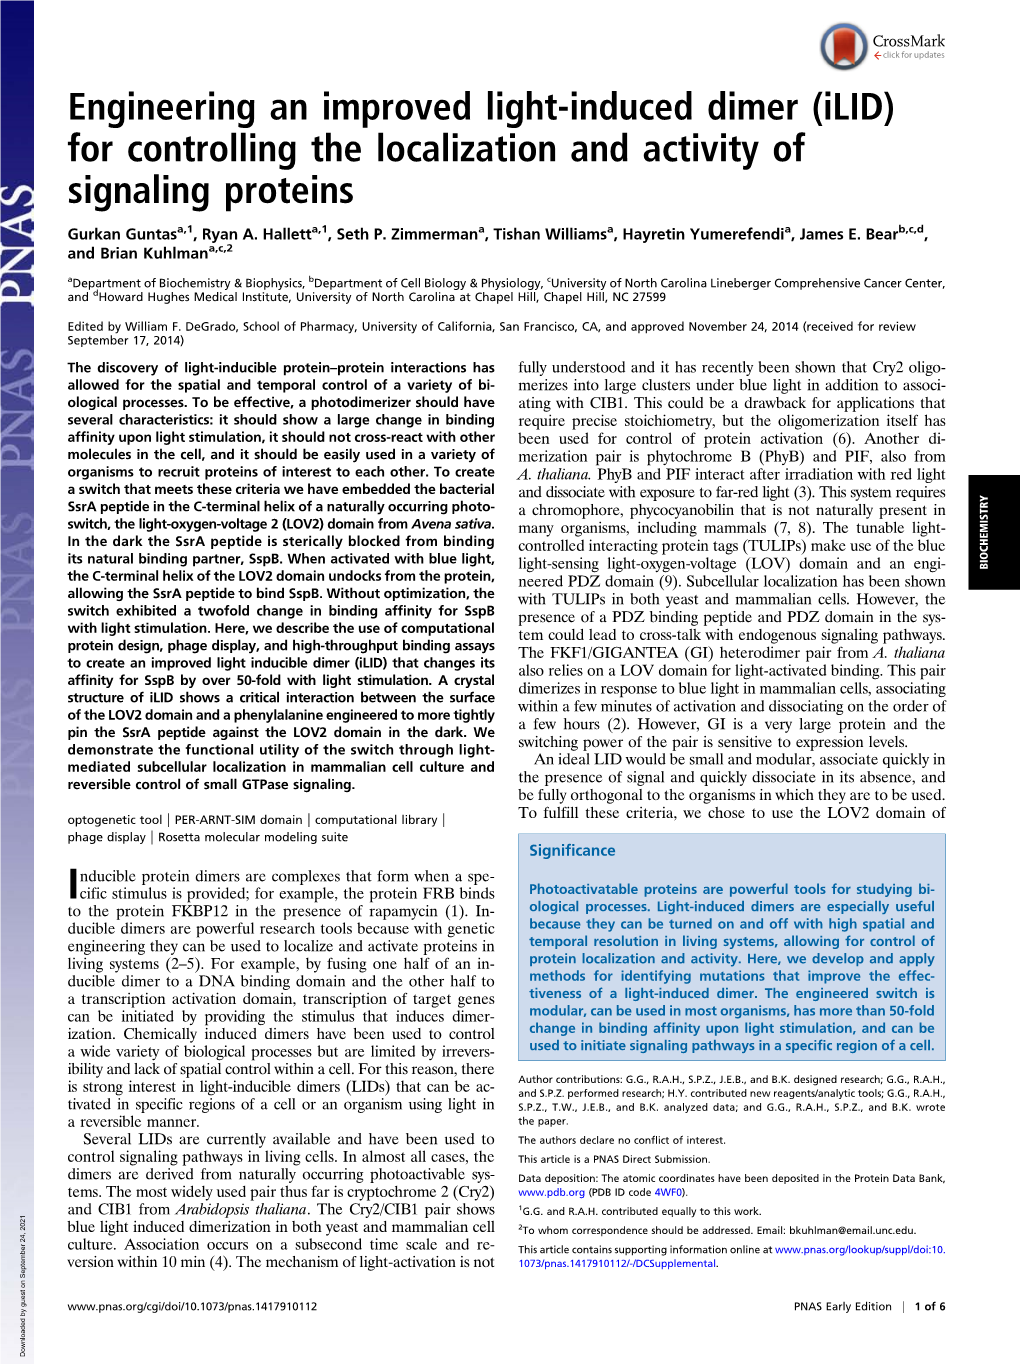 Engineering an Improved Light-Induced Dimer (Ilid) for Controlling the Localization and Activity of Signaling Proteins